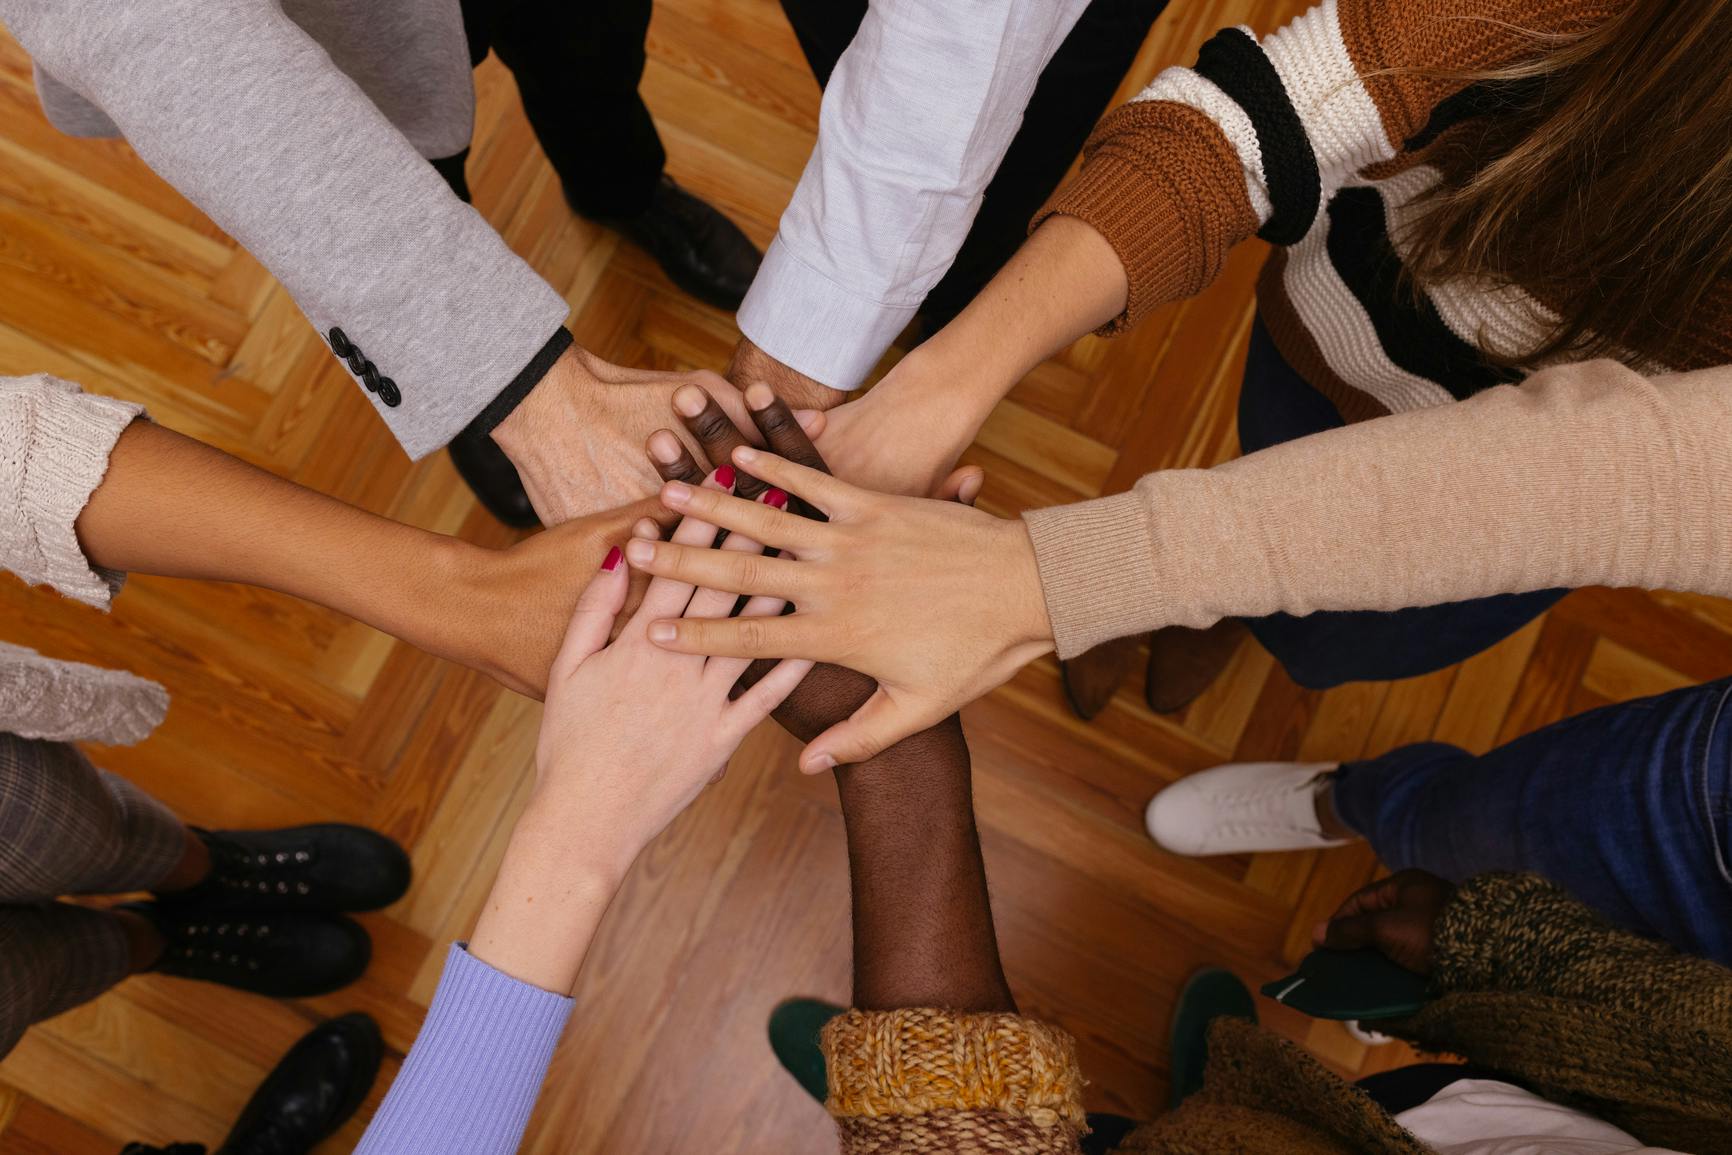 A closeup photograph of a group of people standing together with their arms pointing inward, creating a circle, their hands overlapping.